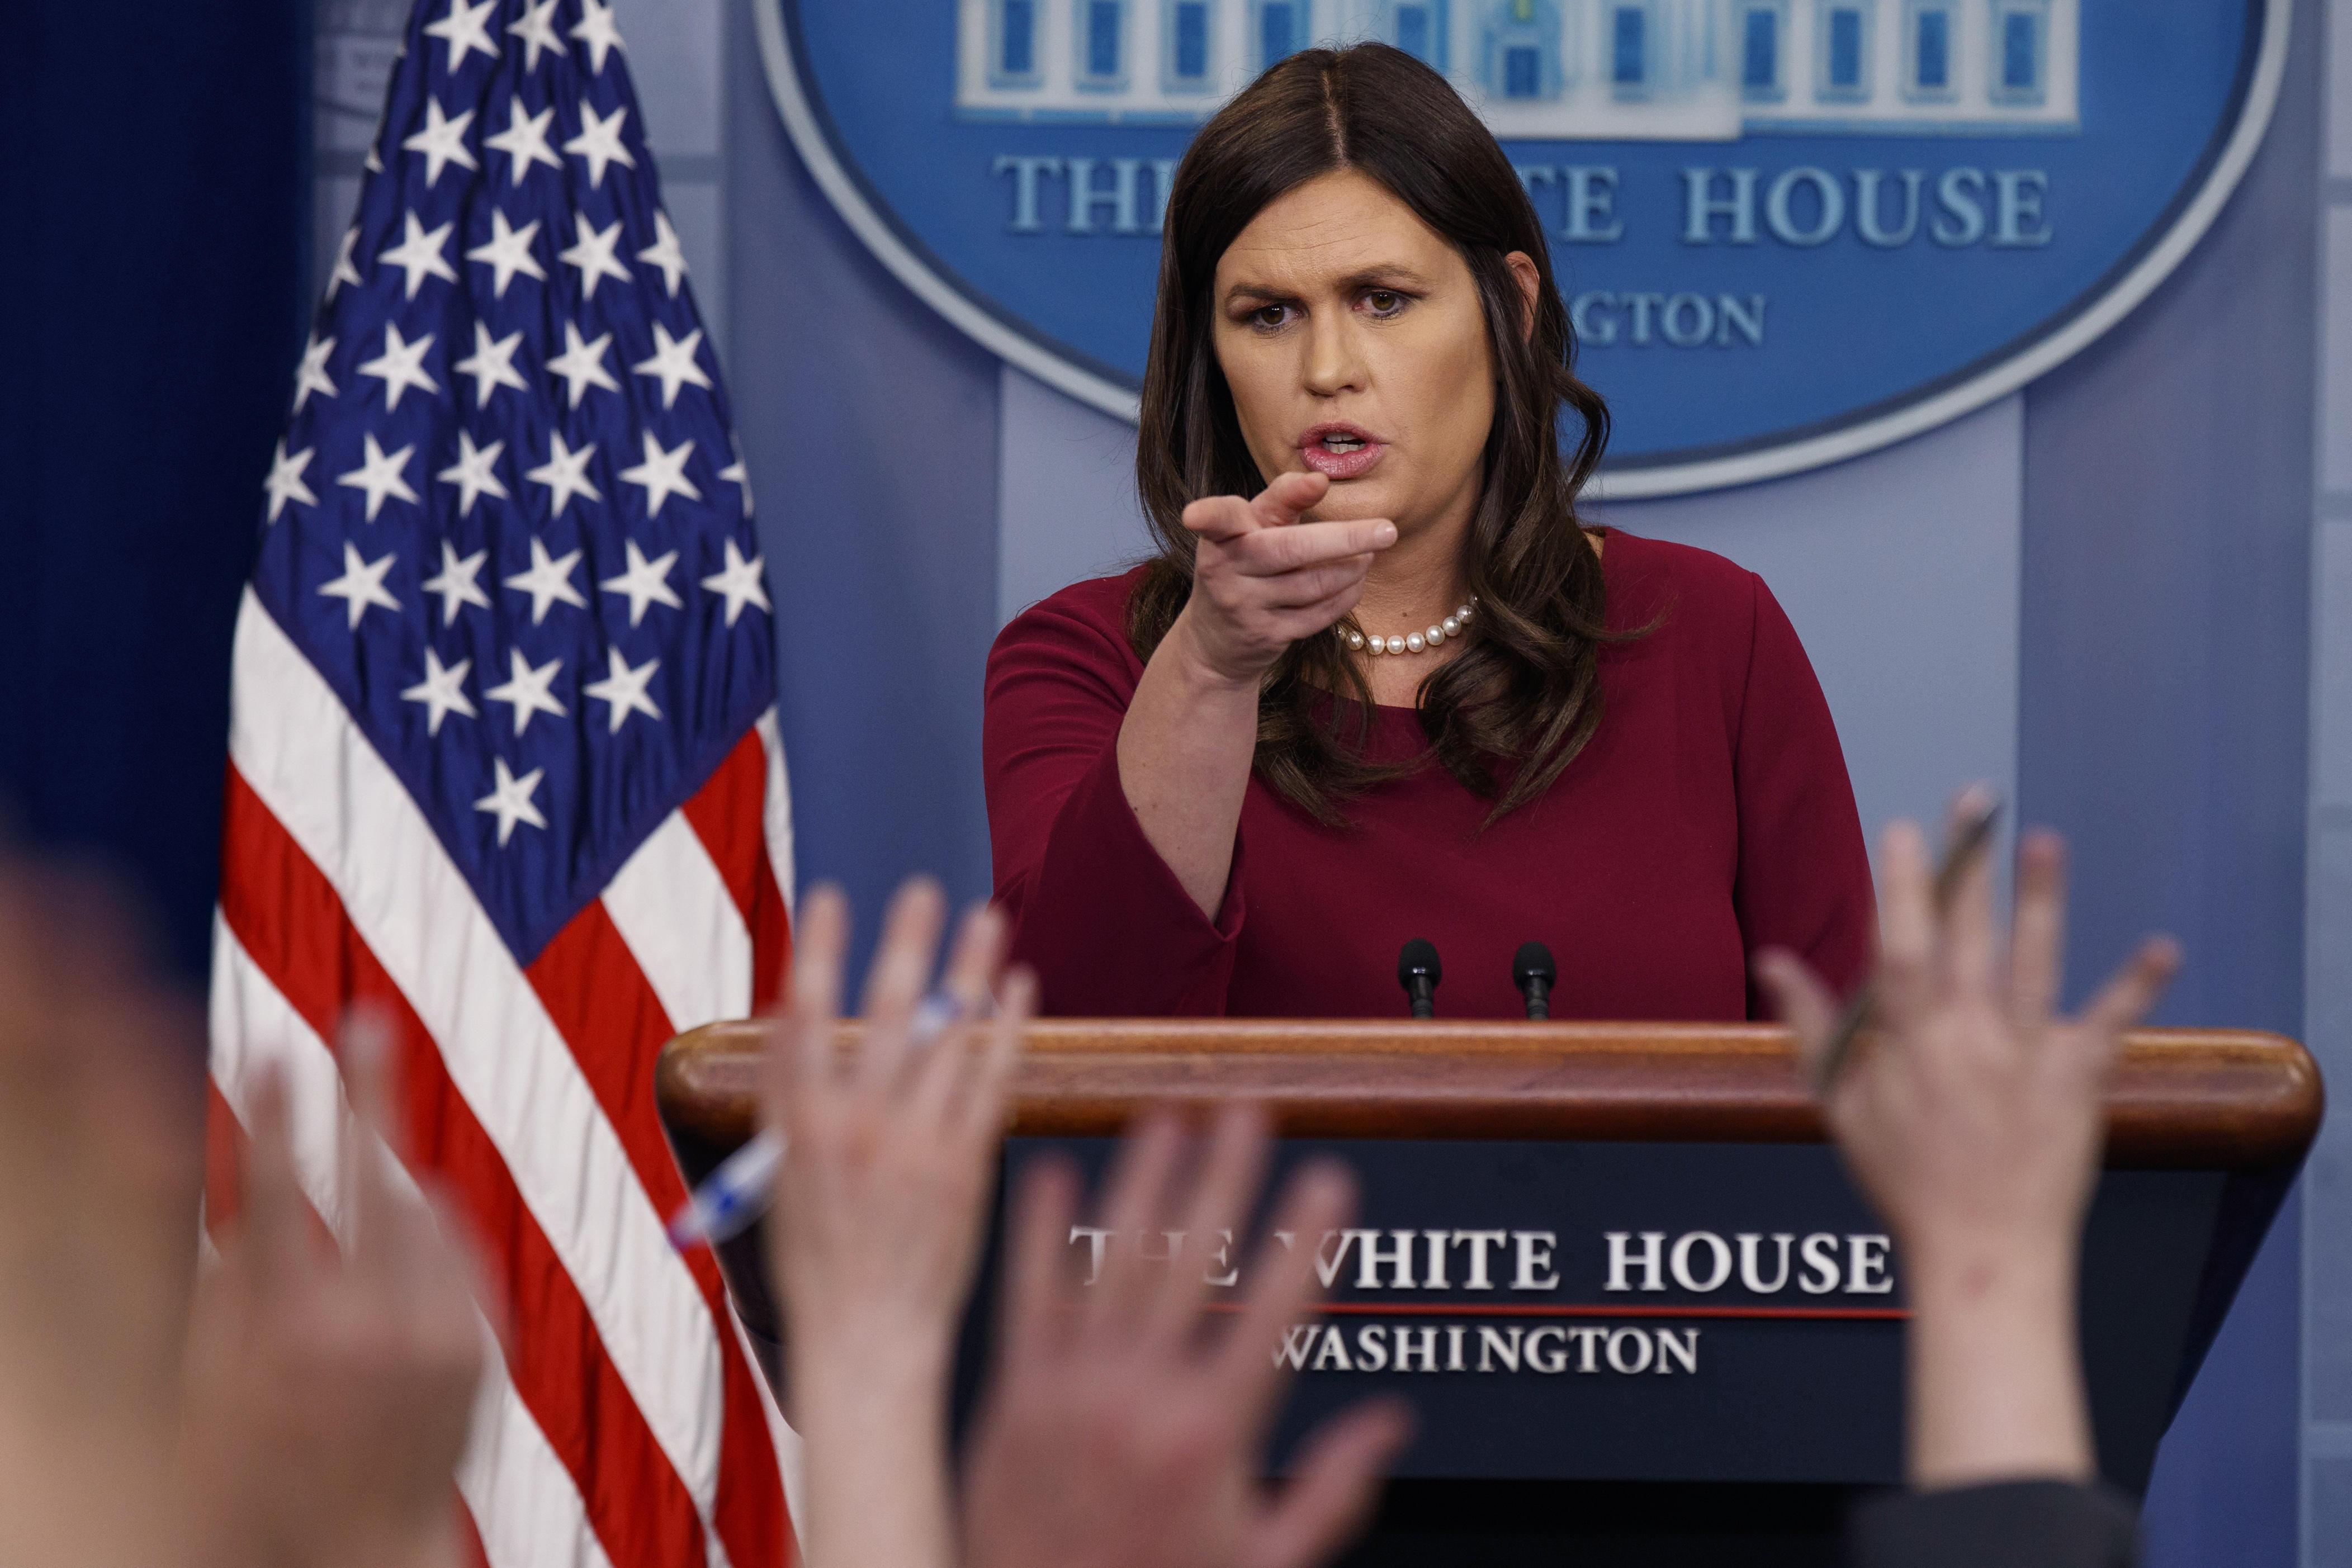 White House press secretary Sarah Huckabee Sanders speaks during the daily press briefing at the White House, Tuesday, April 10, 2018, in Washington. (AP Photo/Evan Vucci)